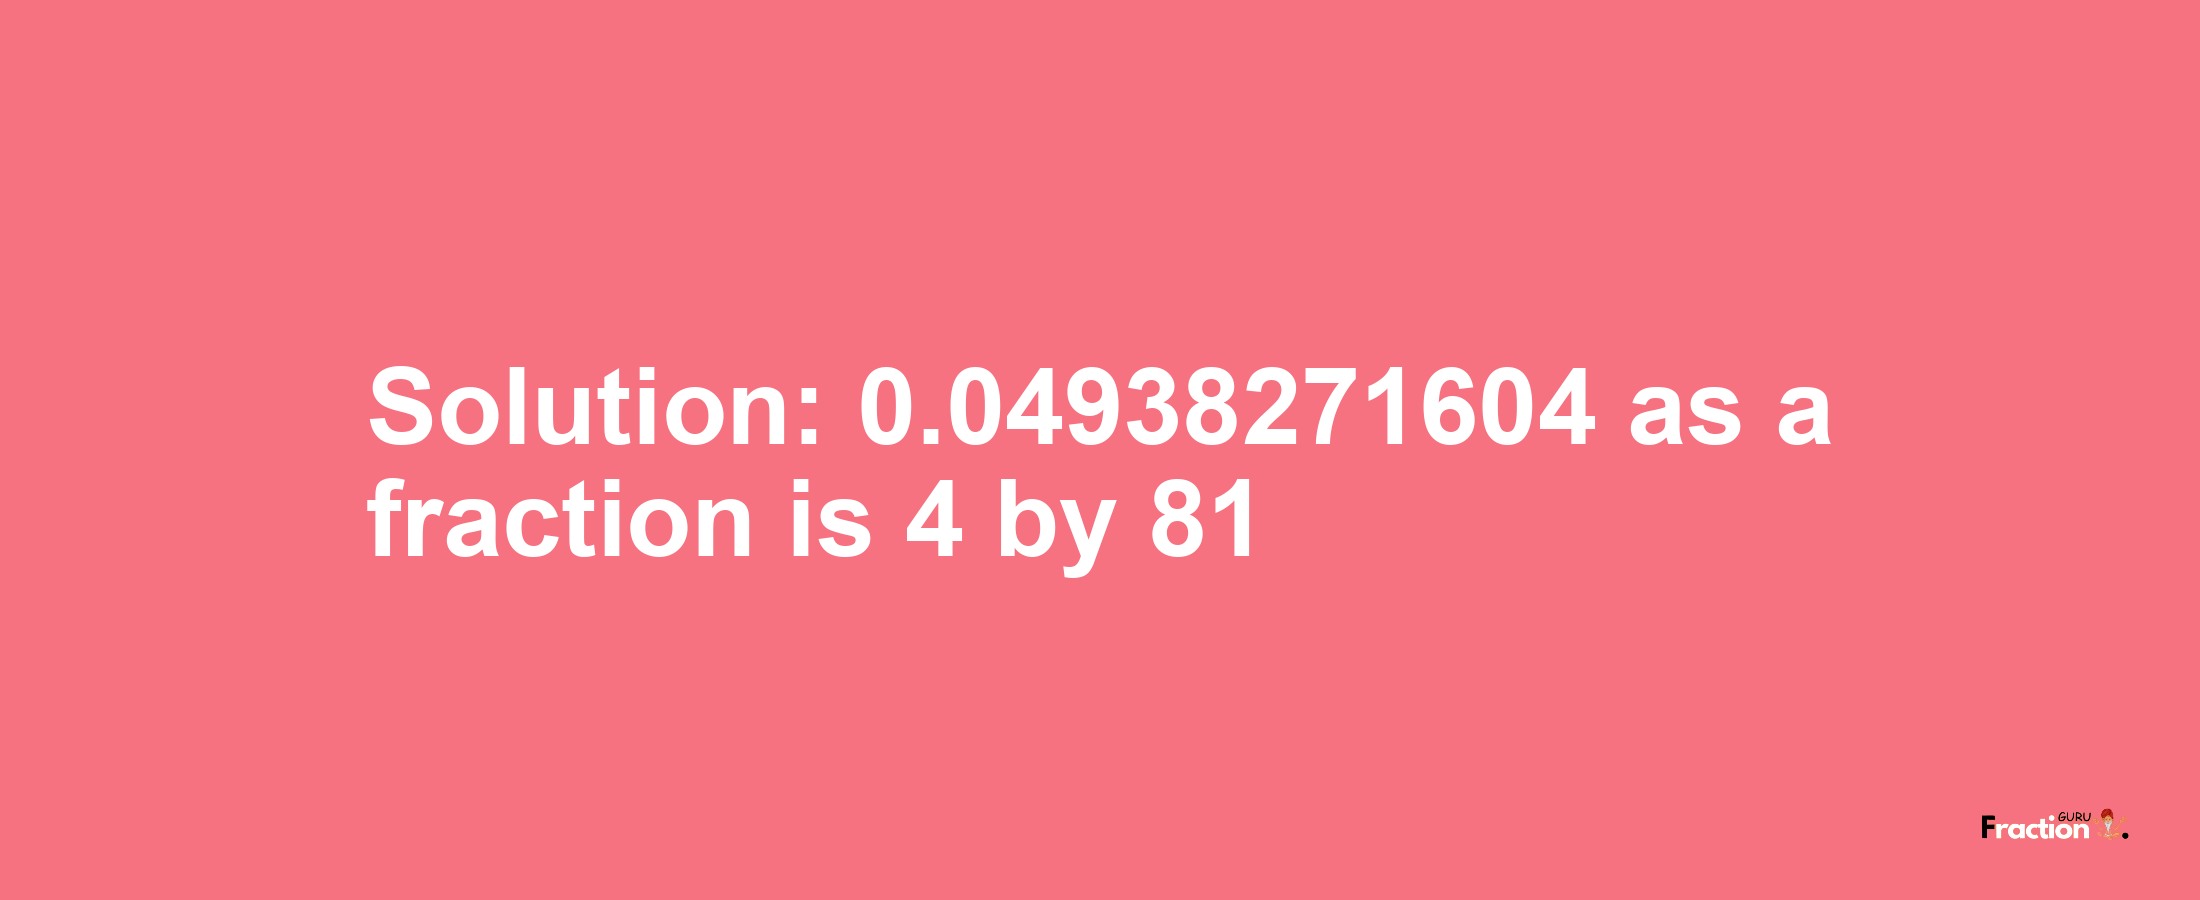 Solution:0.04938271604 as a fraction is 4/81